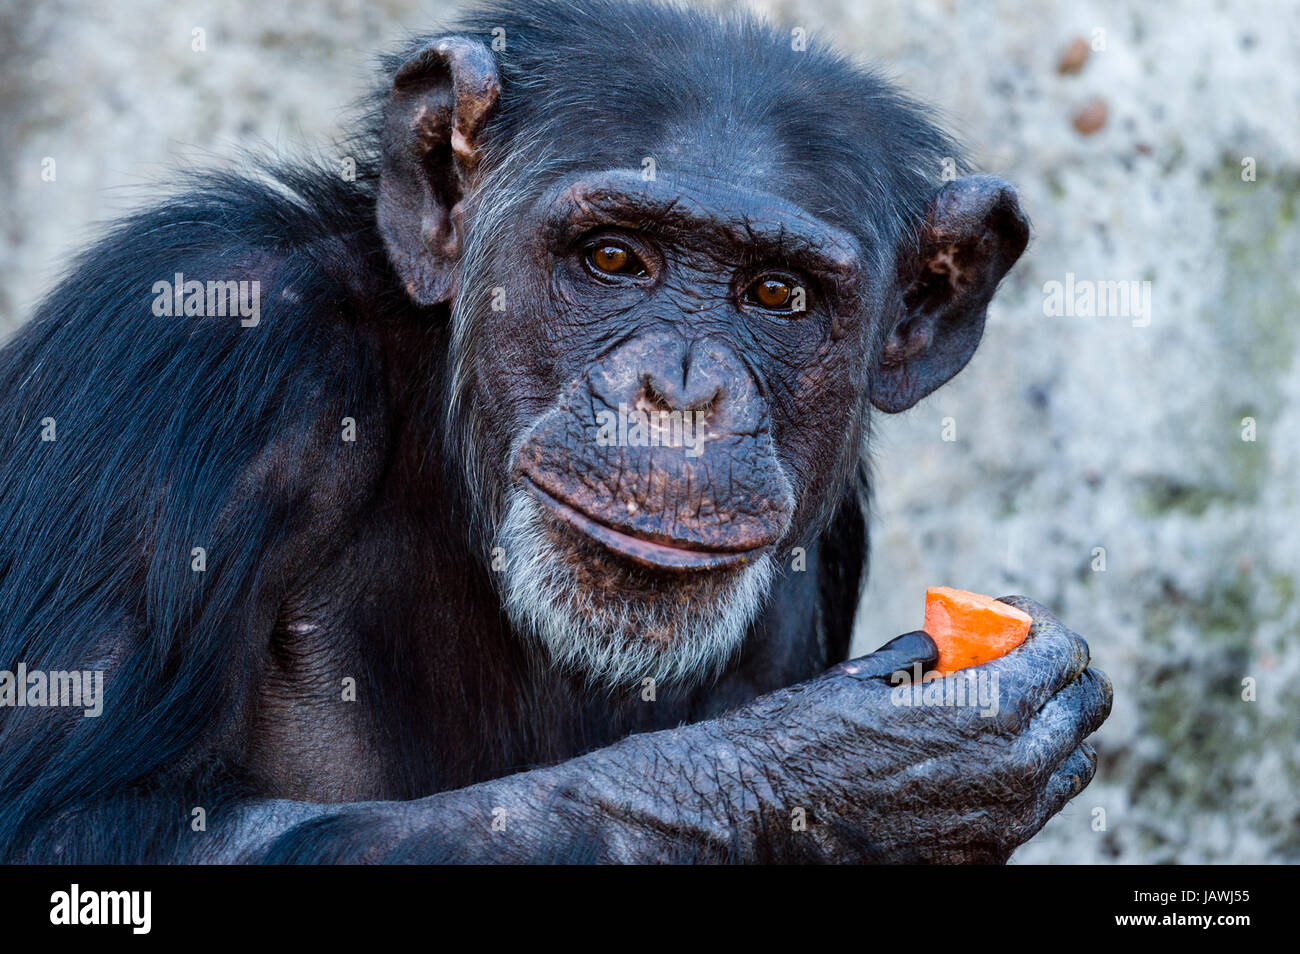 The bright inquisitive eyes and leathery face of a Chimpanzee eating a carrot. Stock Photo